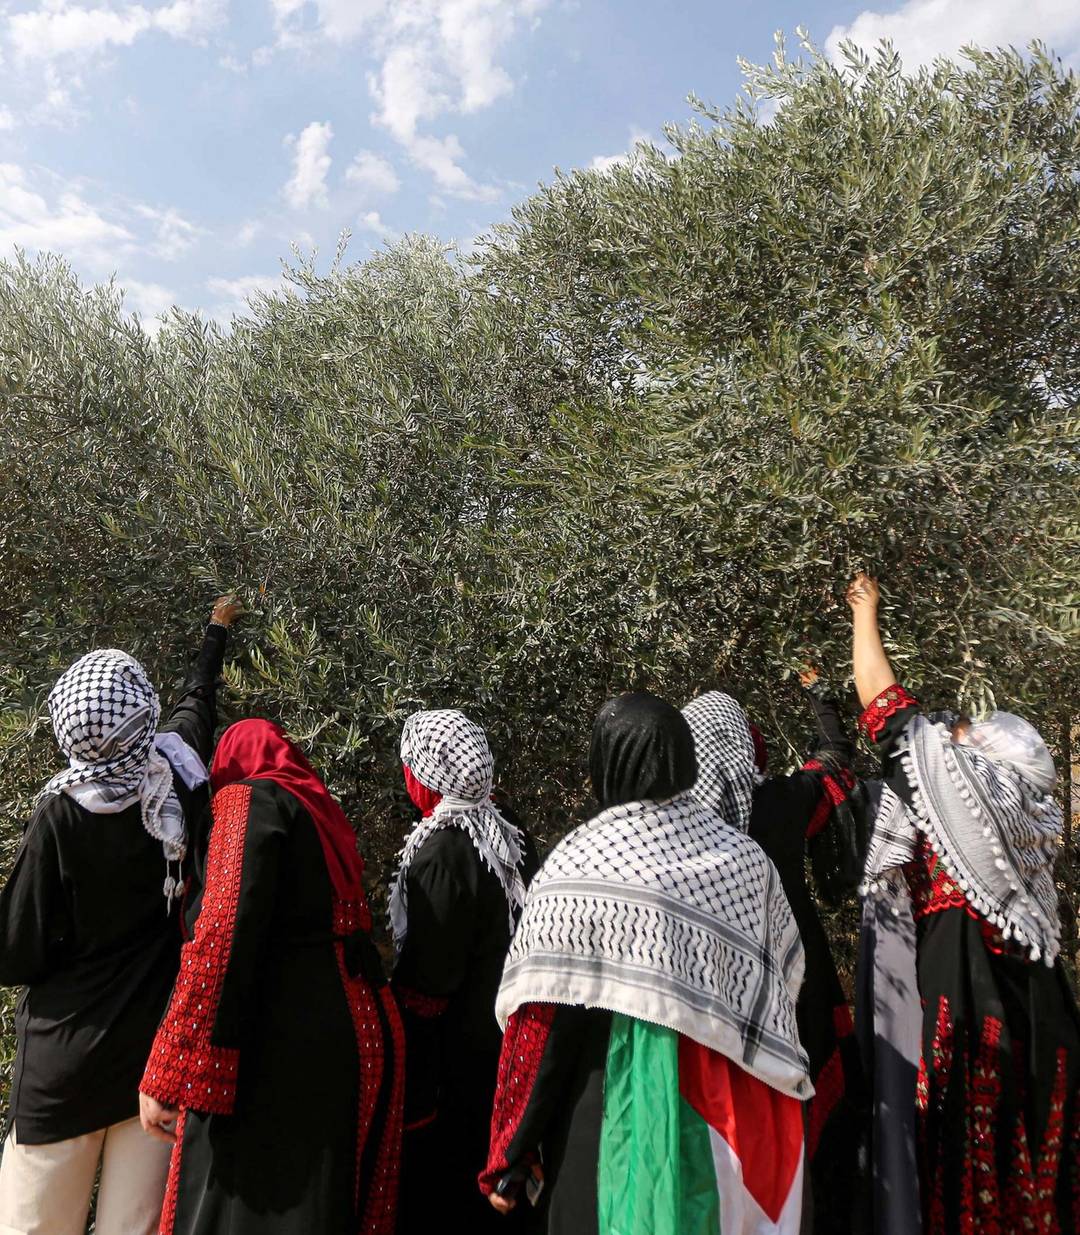 Palestinian women harvest olives in Khan Yunis in the southern Gaza Strip, two days before Hamas' attack on Israel